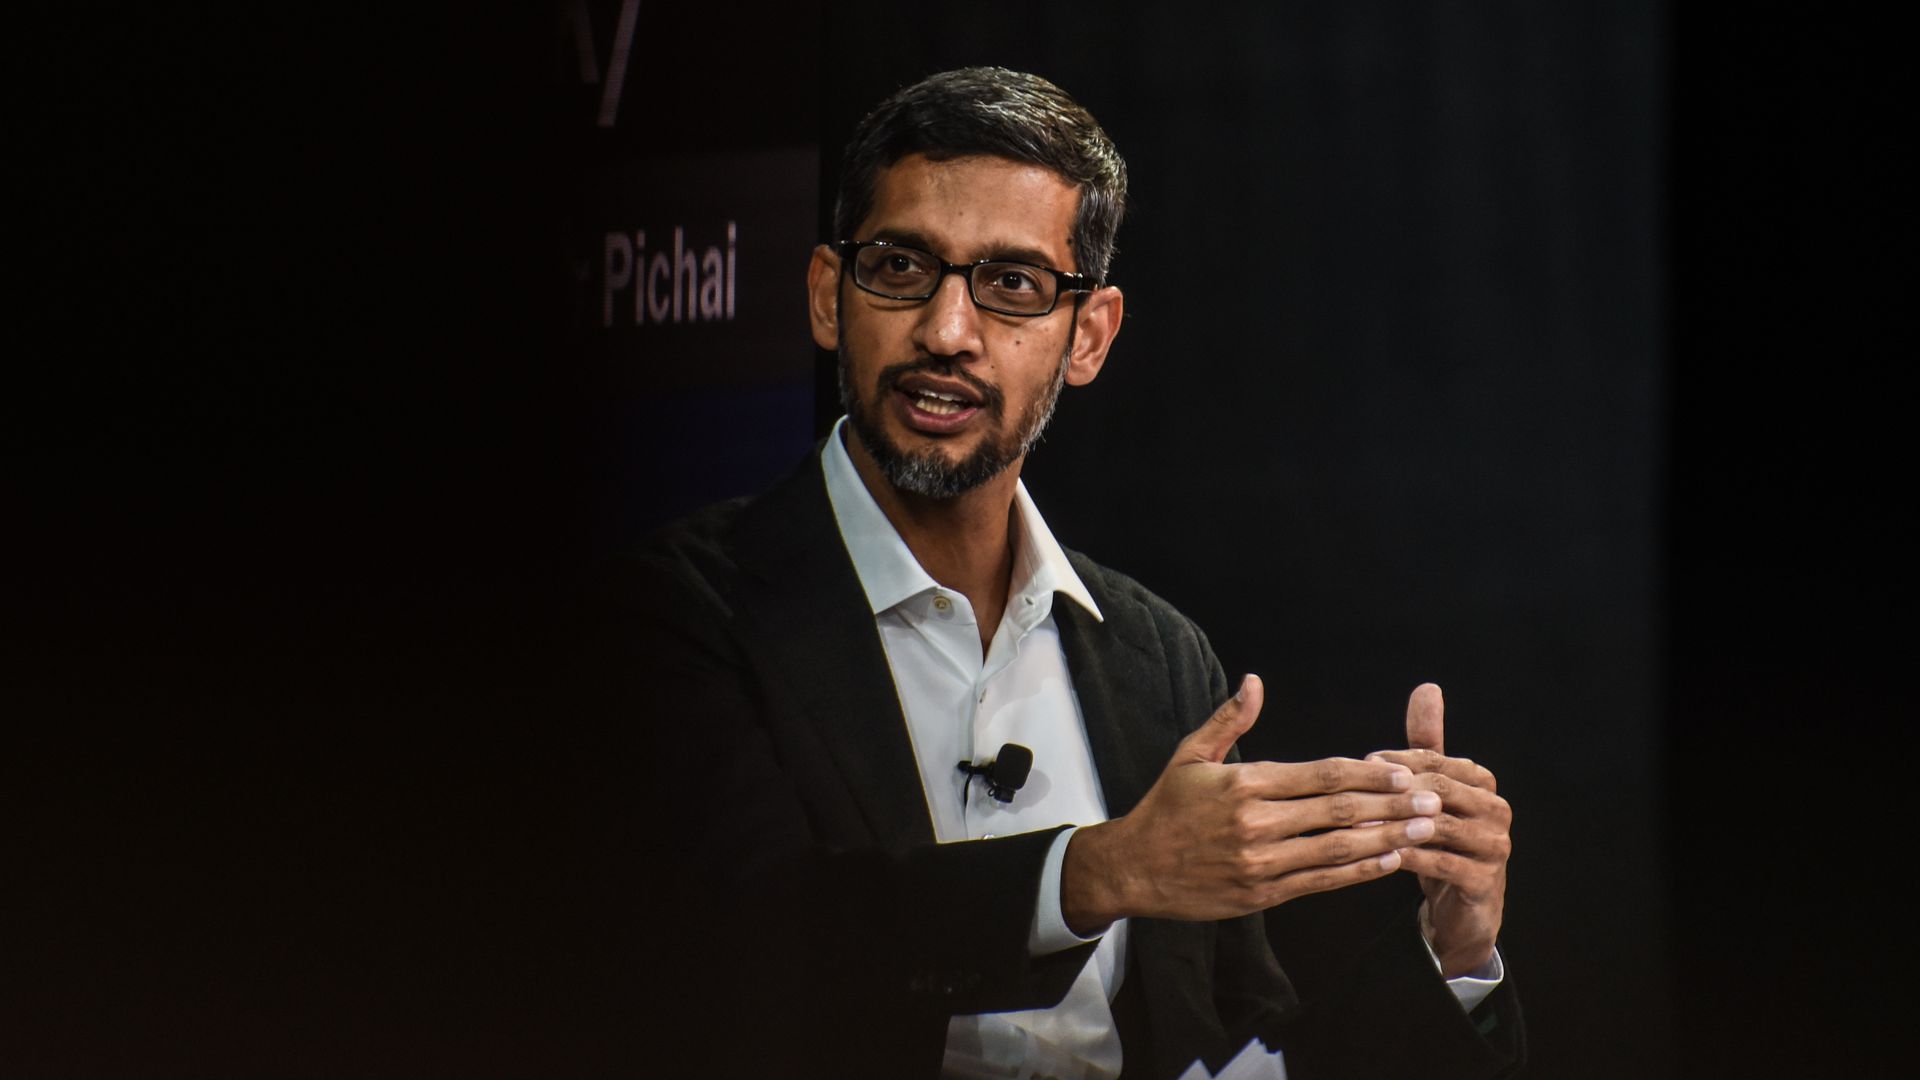 Google CEO Pichai Calls For A More Global Internet Amid India’s Data Protection Push